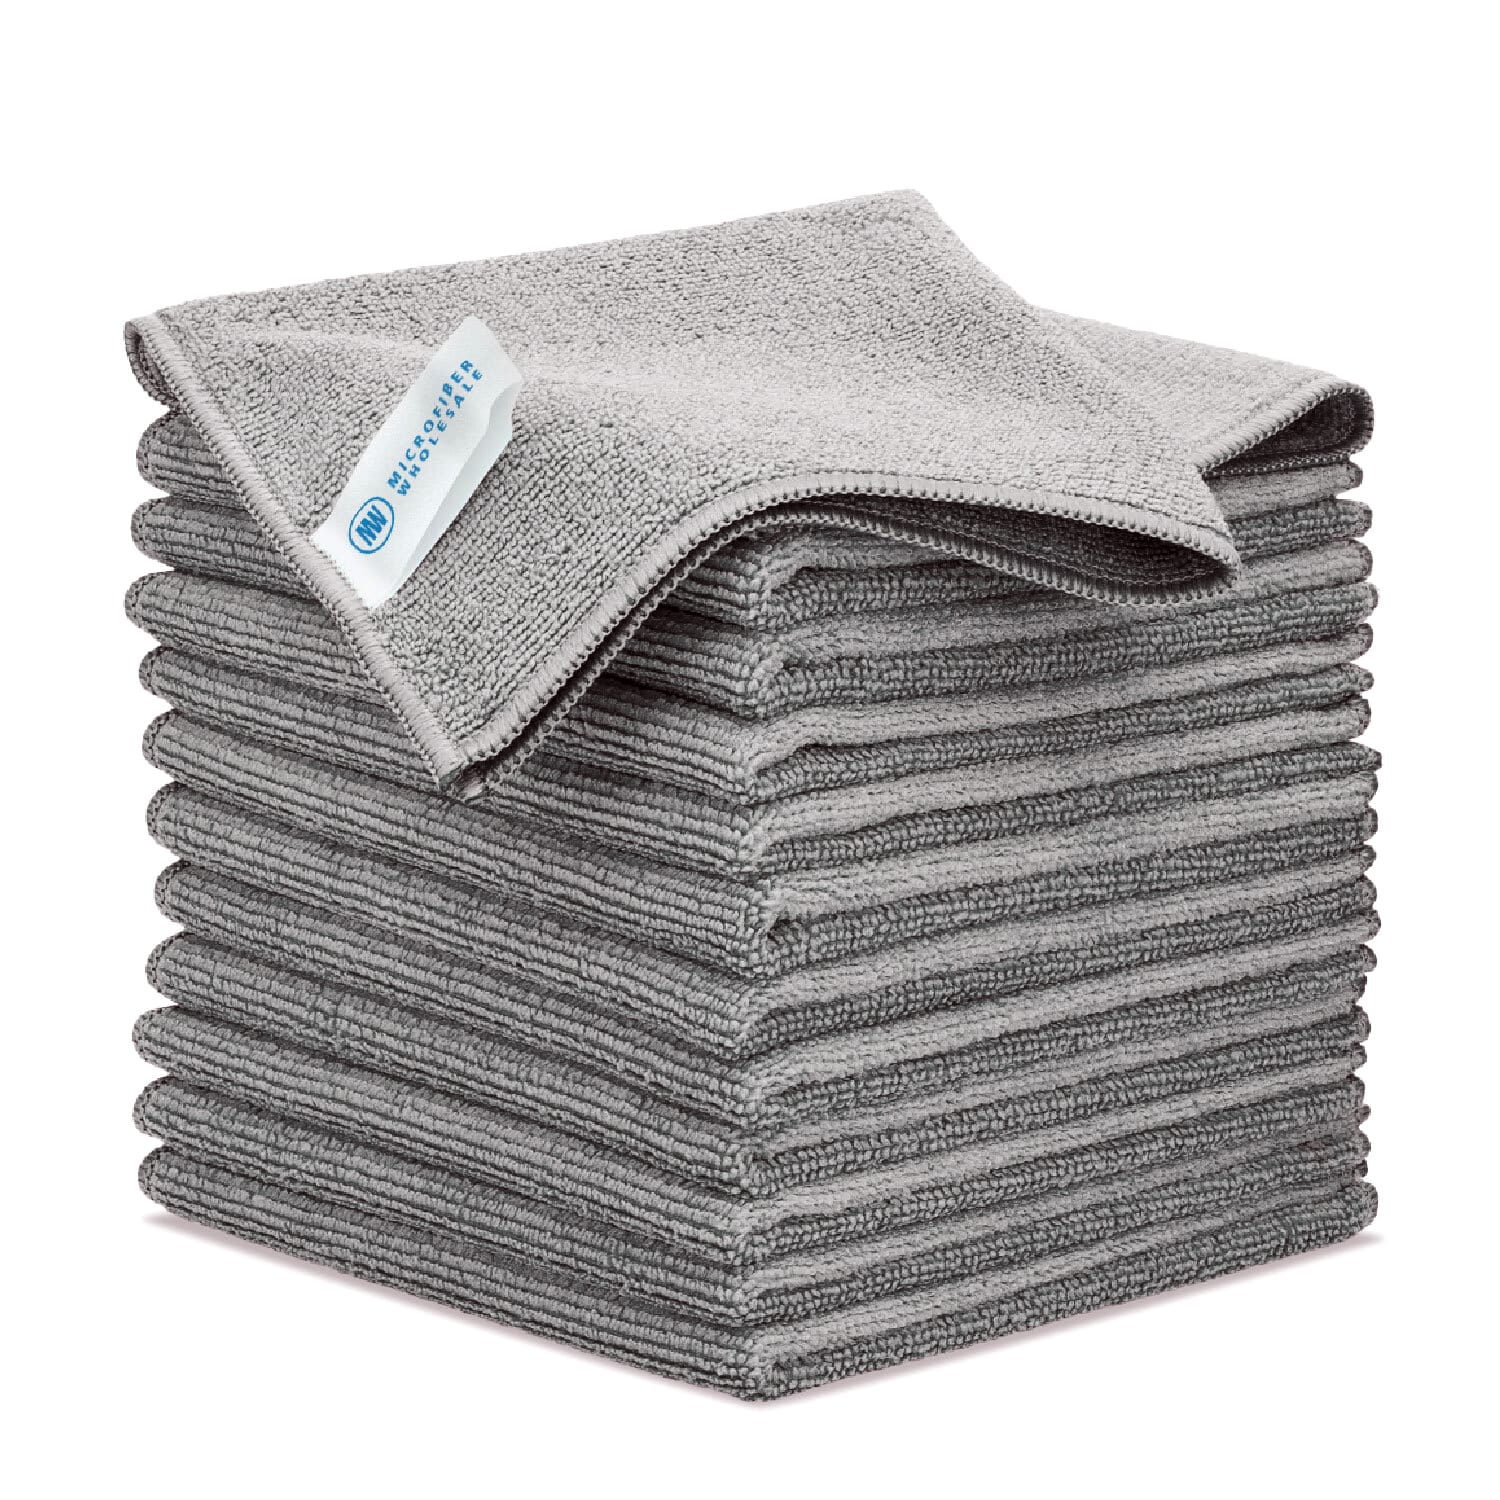 KROSSED Premium Microfiber Cleaning Cloth 12 Pack Grey (12”x 12”) | 300 GSM  Compared to Competition at 200 GSM; All-Purpose Cleaning Towel for Home